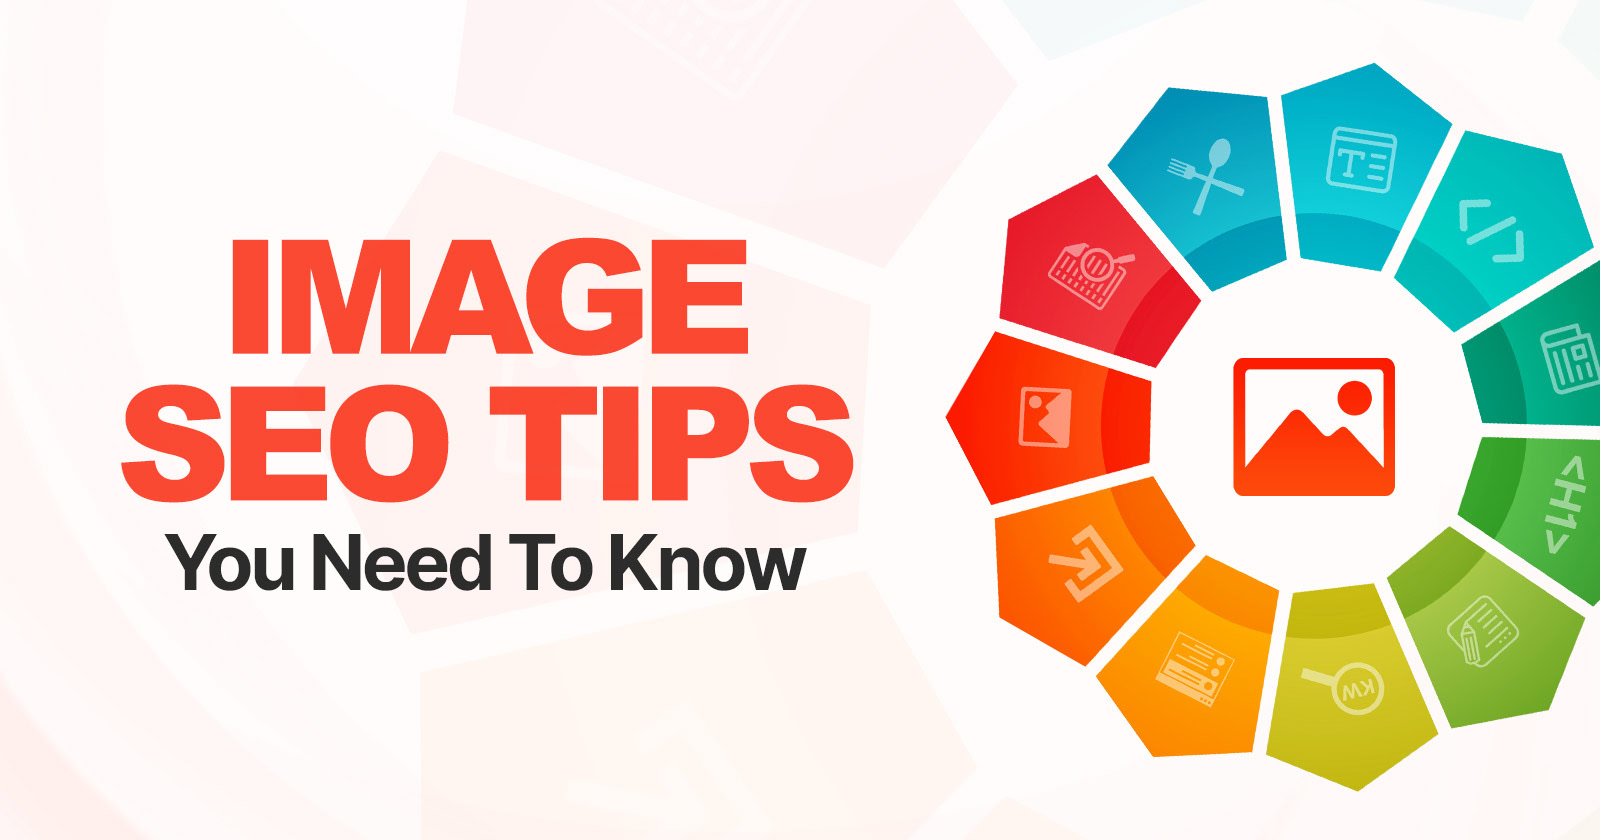 Image SEO tips you need to know